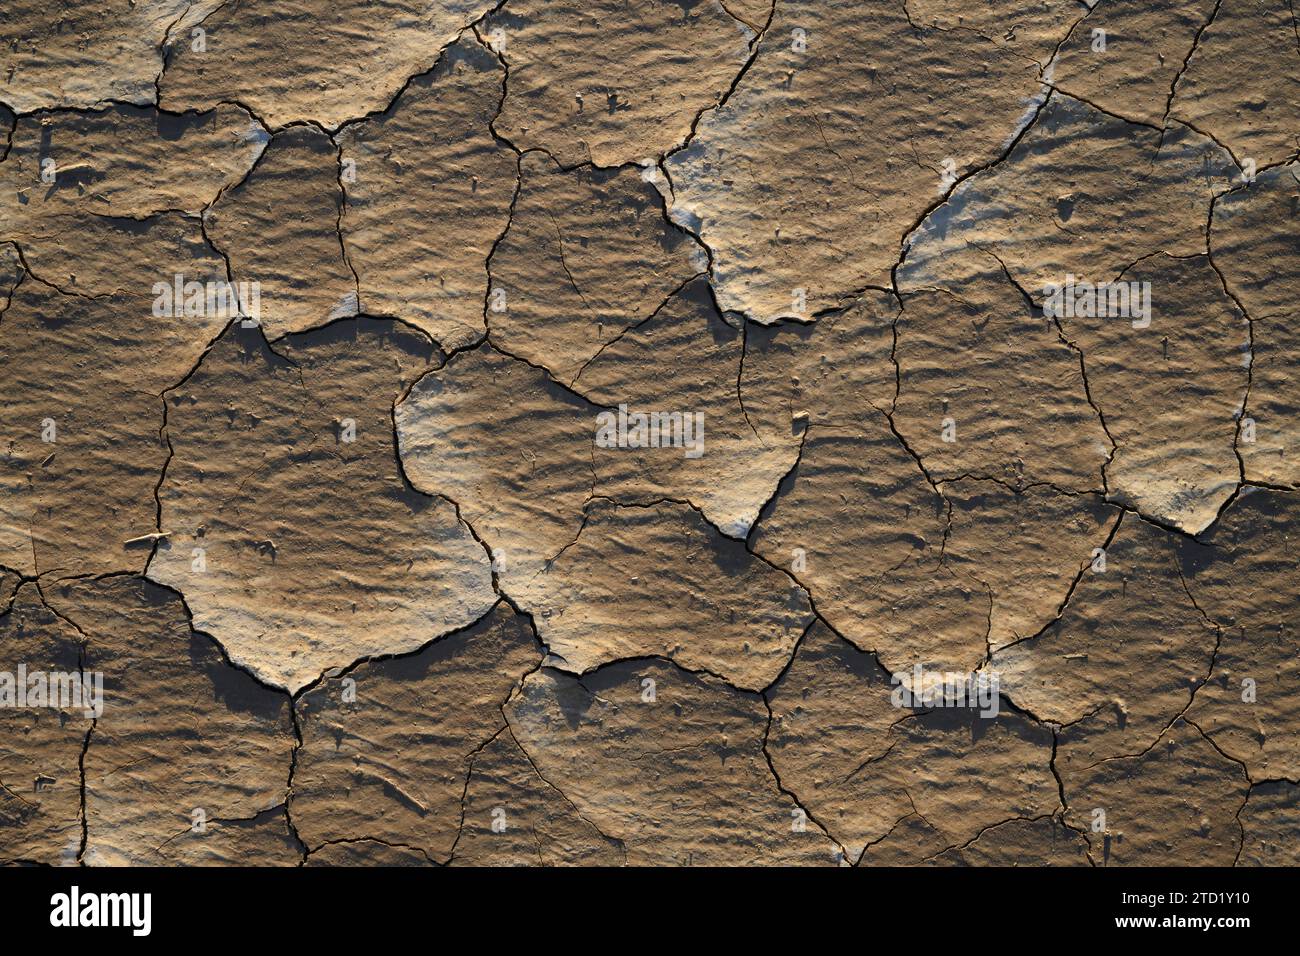 Mud tiles on Panamint Valley playa in Death Valley National Park, California. Stock Photo